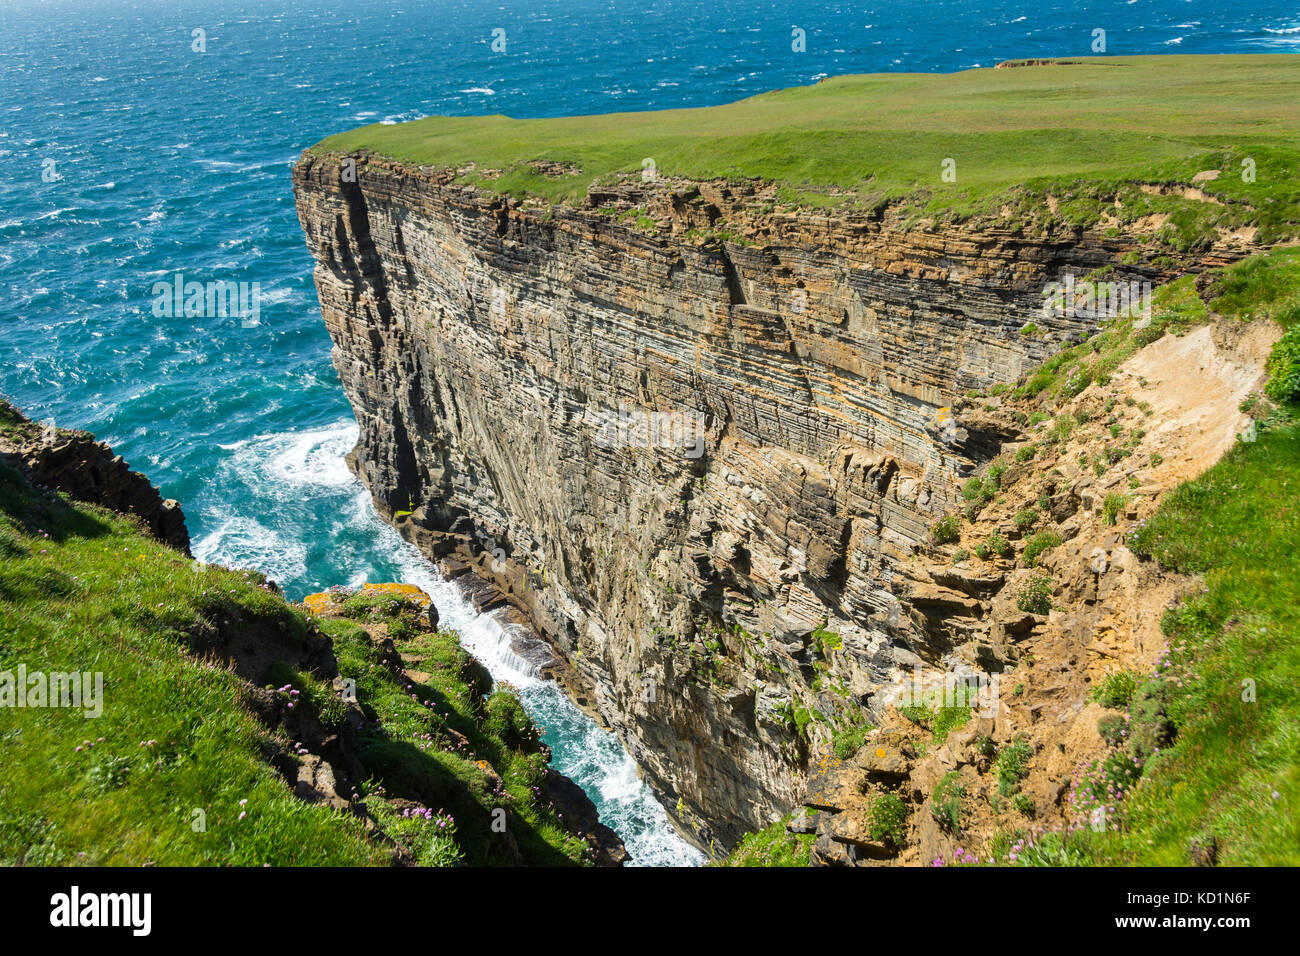 The cliffs at Yesnaby, Orkney Mainland, Scotland, UK. Stock Photo